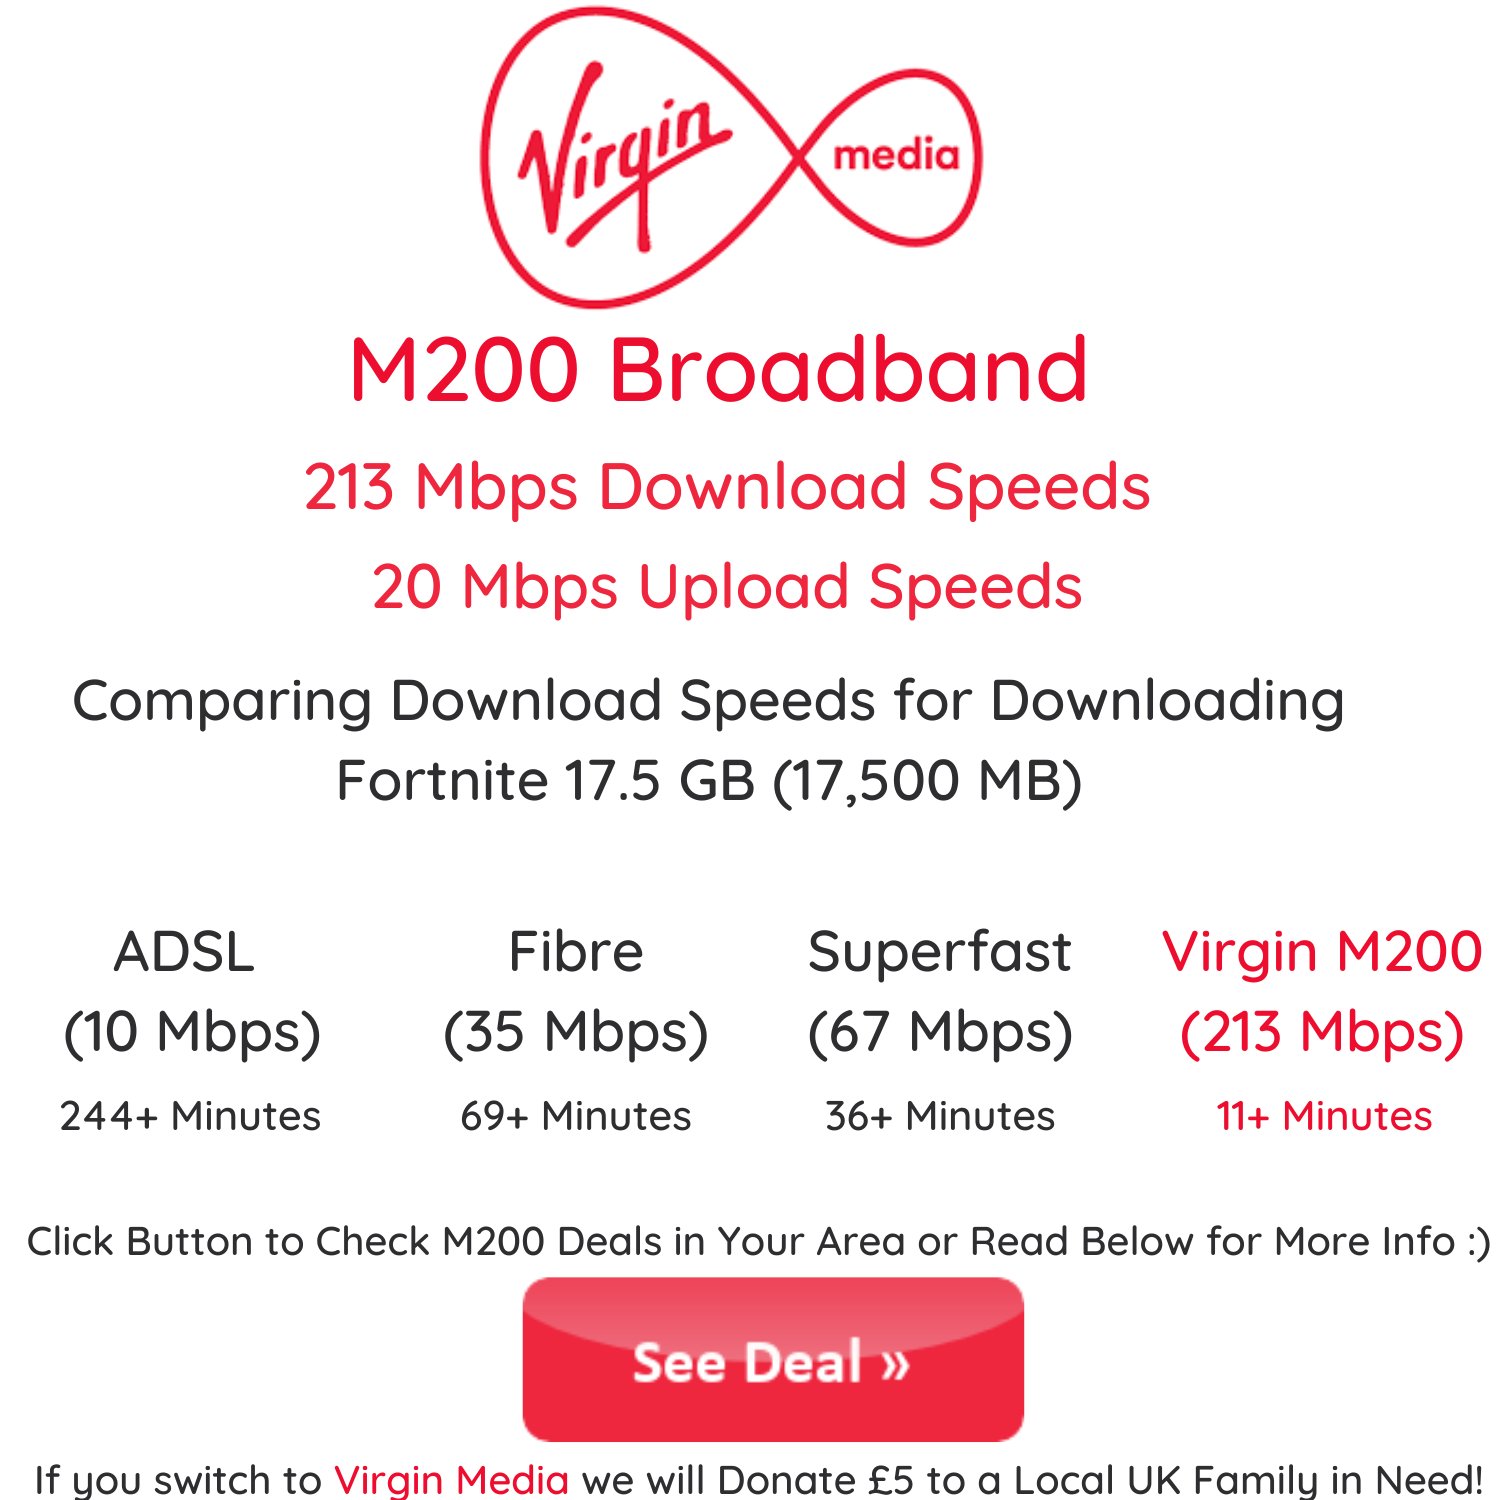 Virgin Media M200 fibre broadband offers 213 Mbps download speed for £33 per month on average. New customers can enjoy free set up during promotional periods.